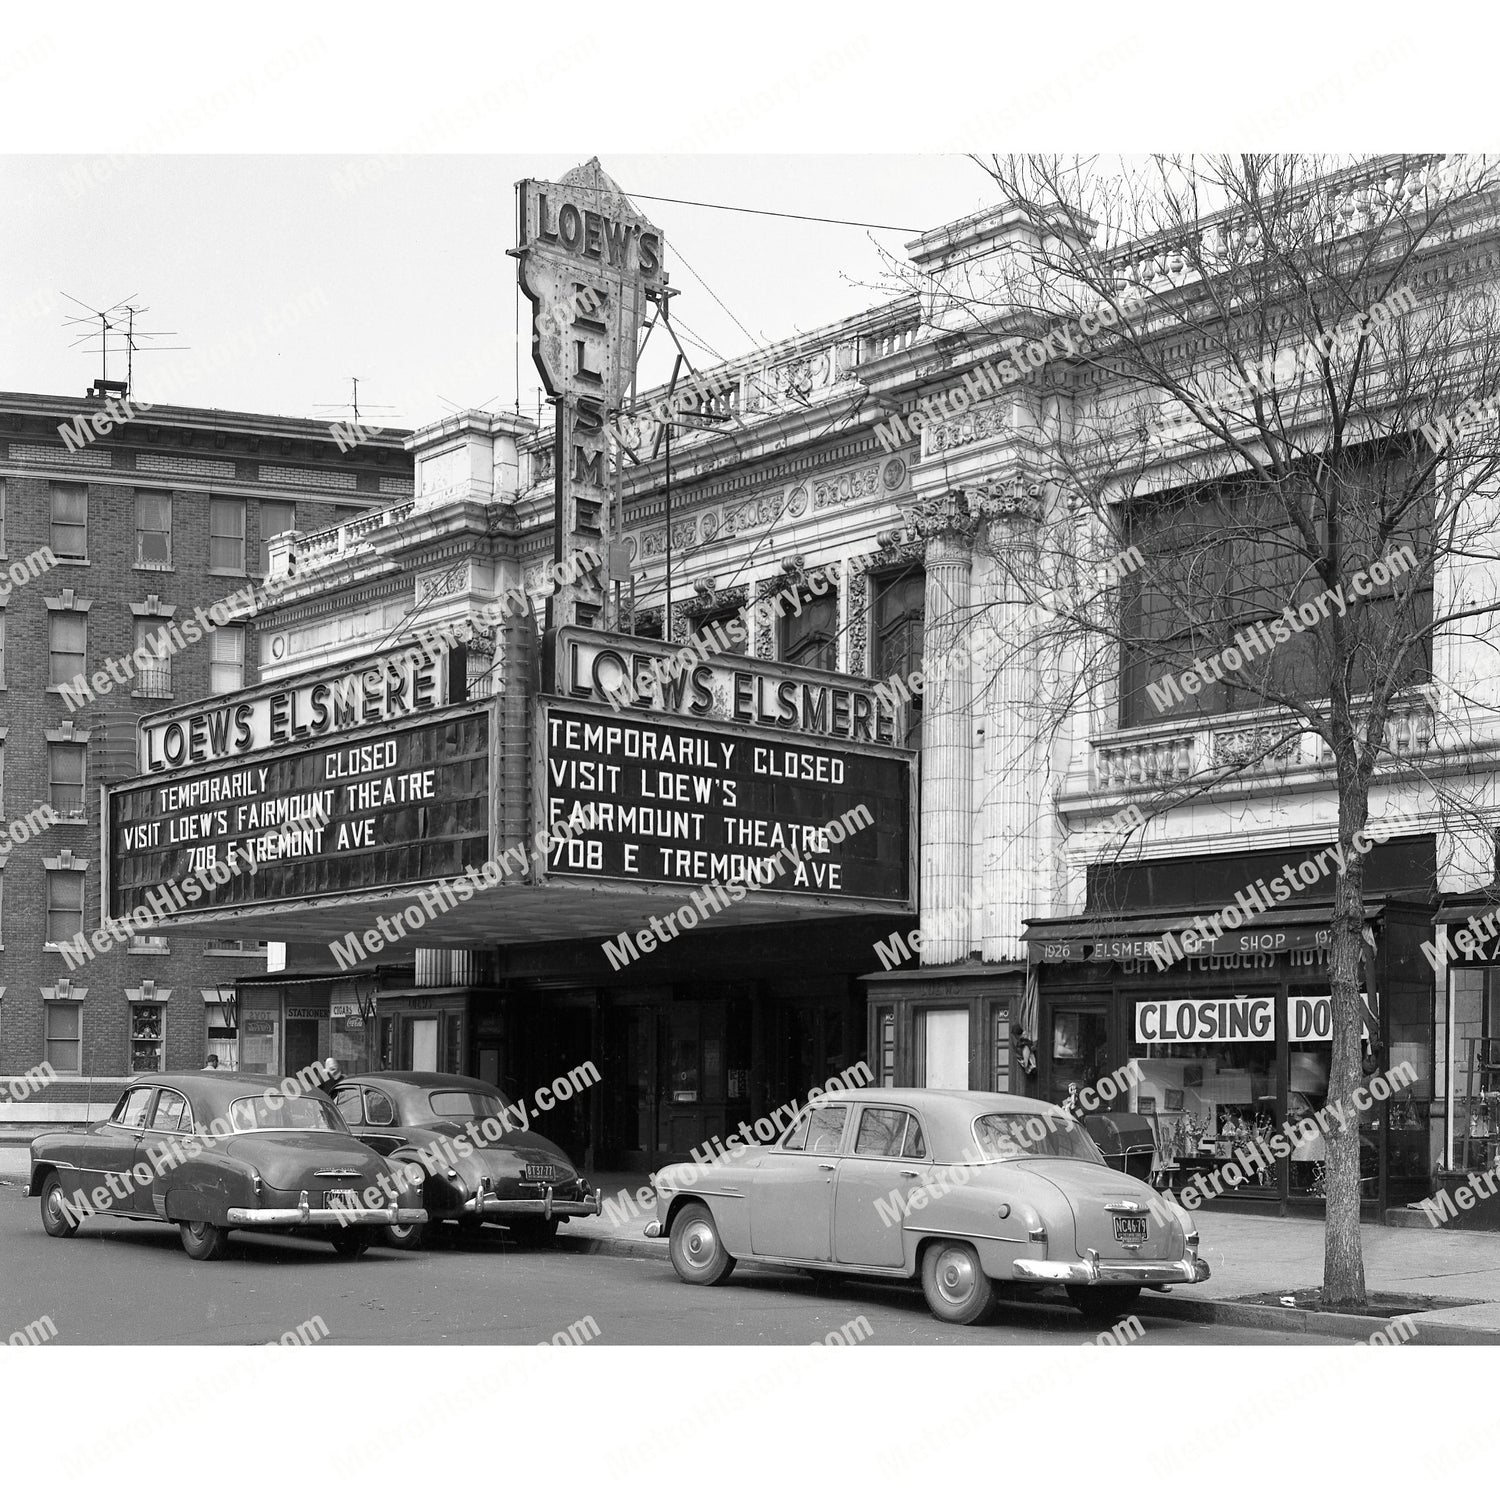 Loew's Elsmere Theatre, 1924 Crotona Parkway at Elsmere Place, Bronx Image ID: 2848-4